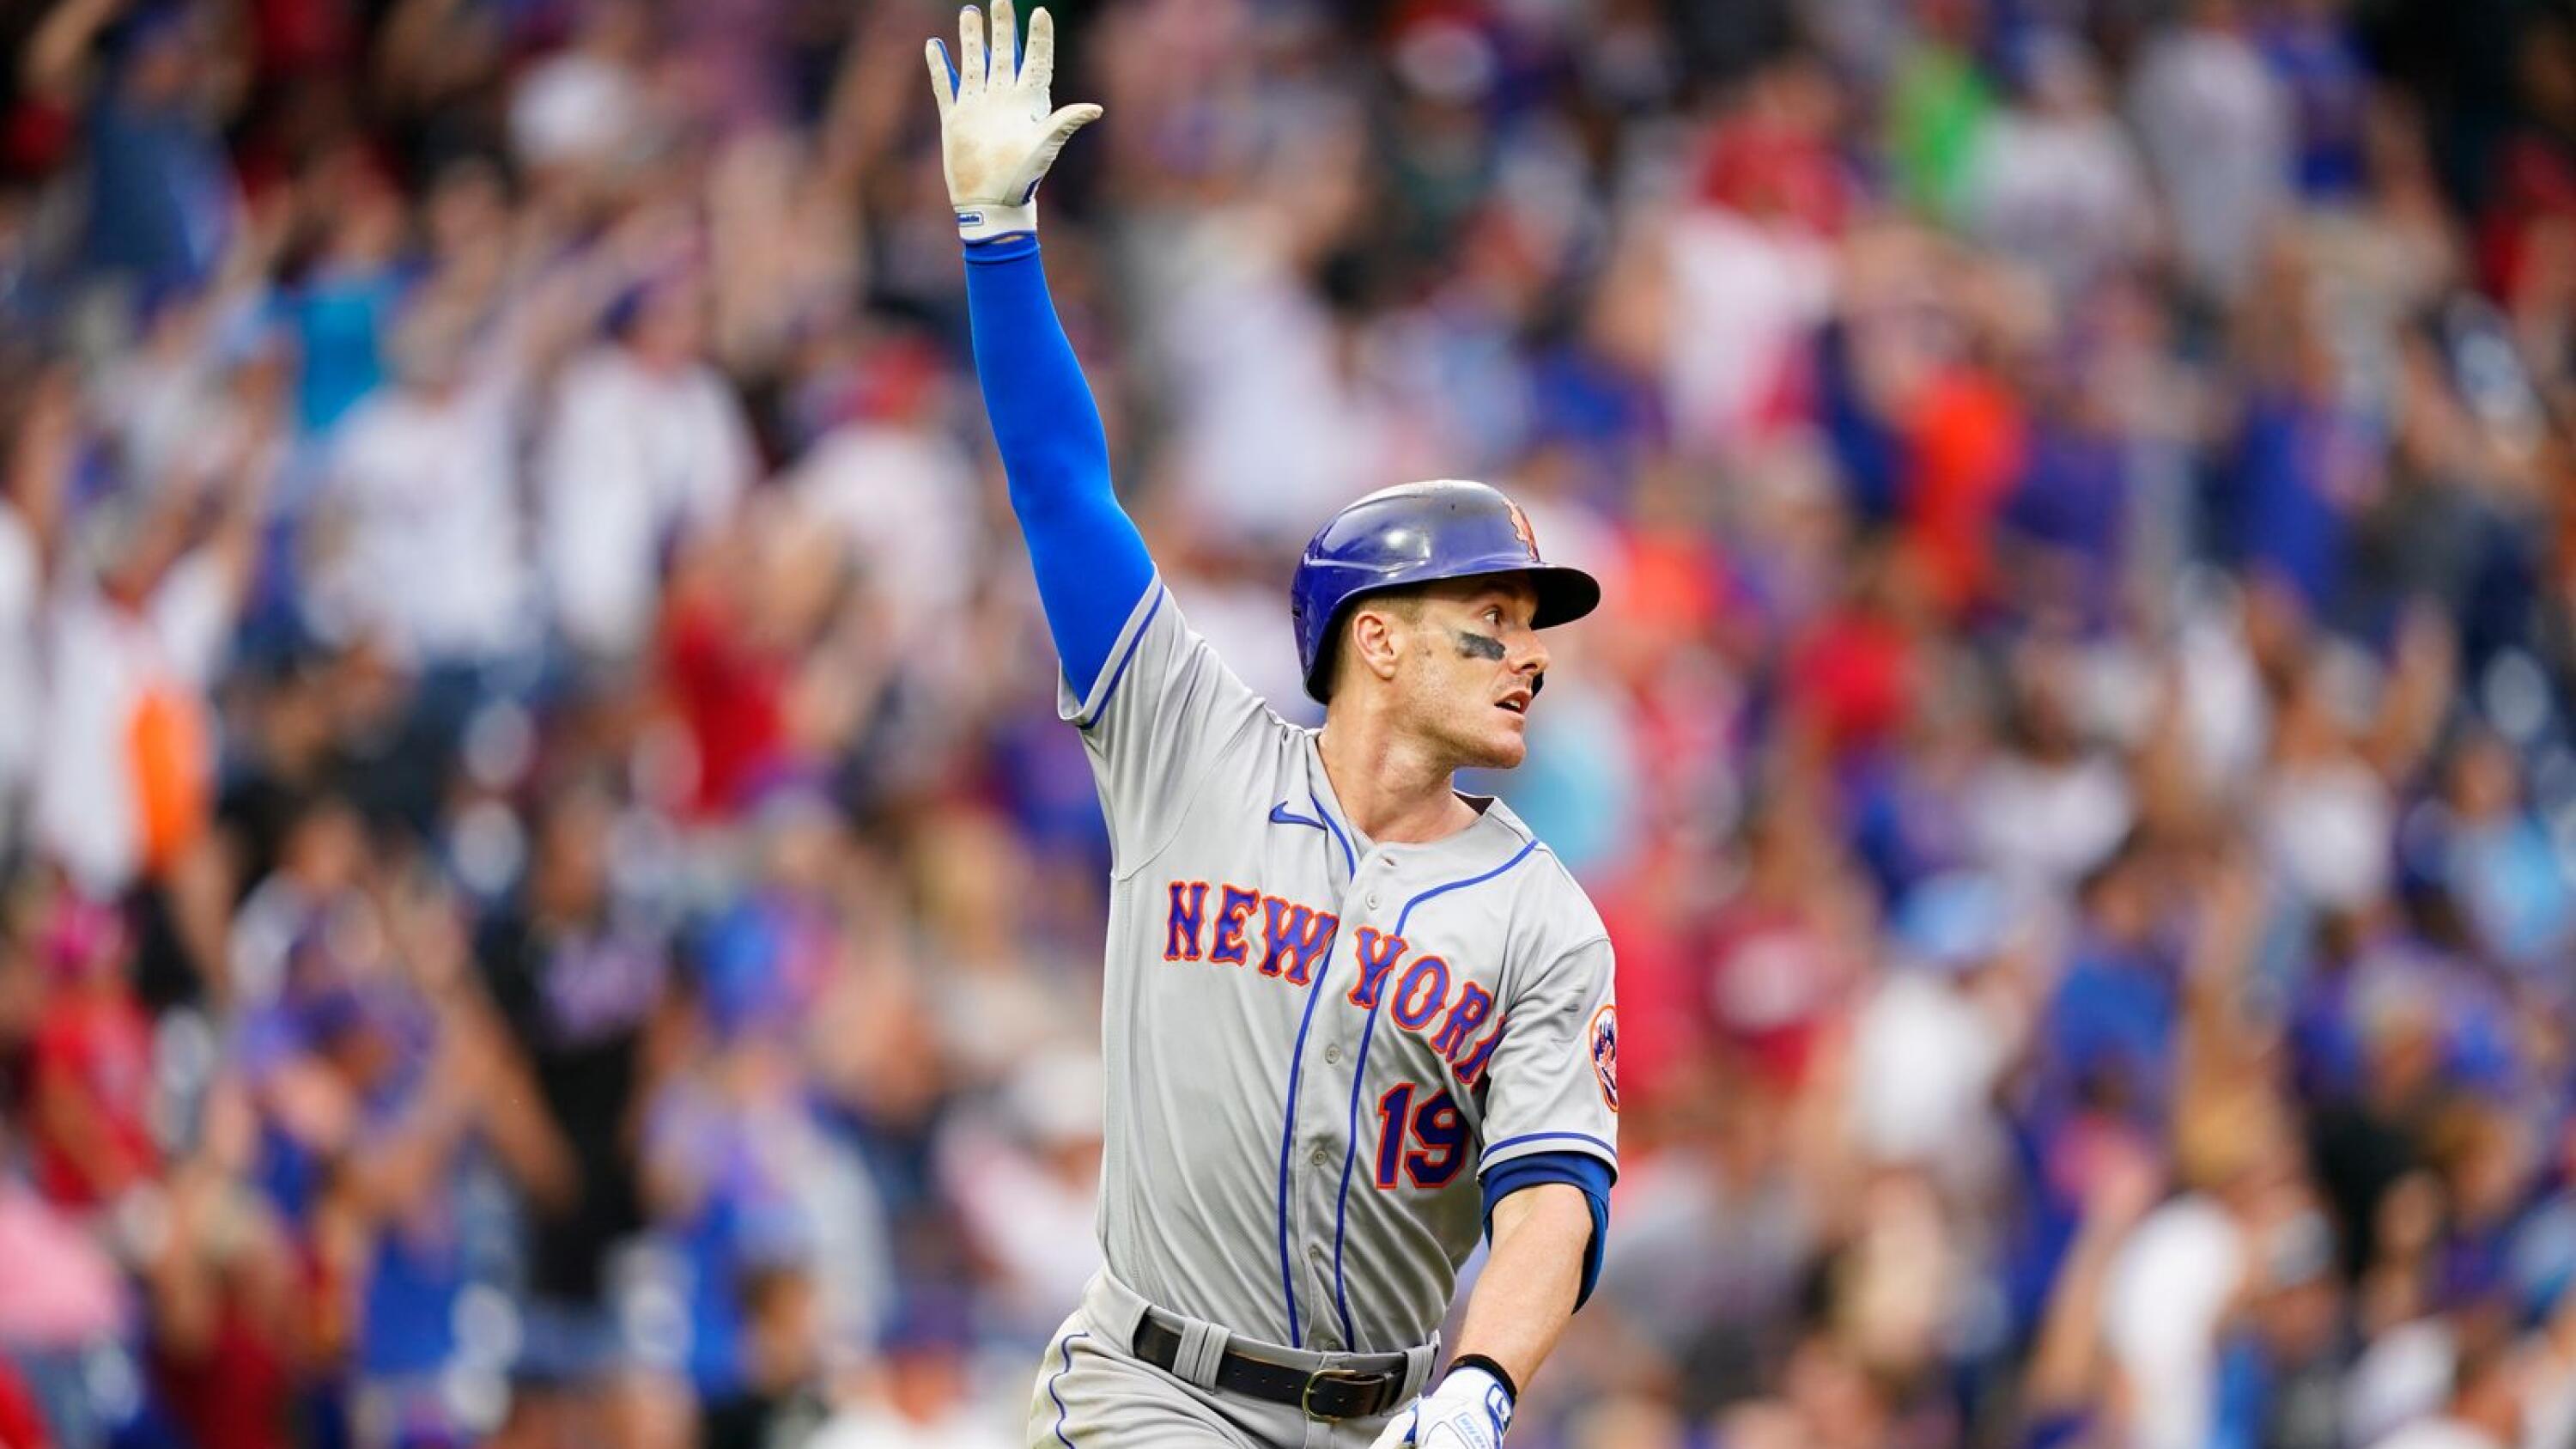 MMO Exclusive: Mets Outfielder, Mark Canha - Metsmerized Online